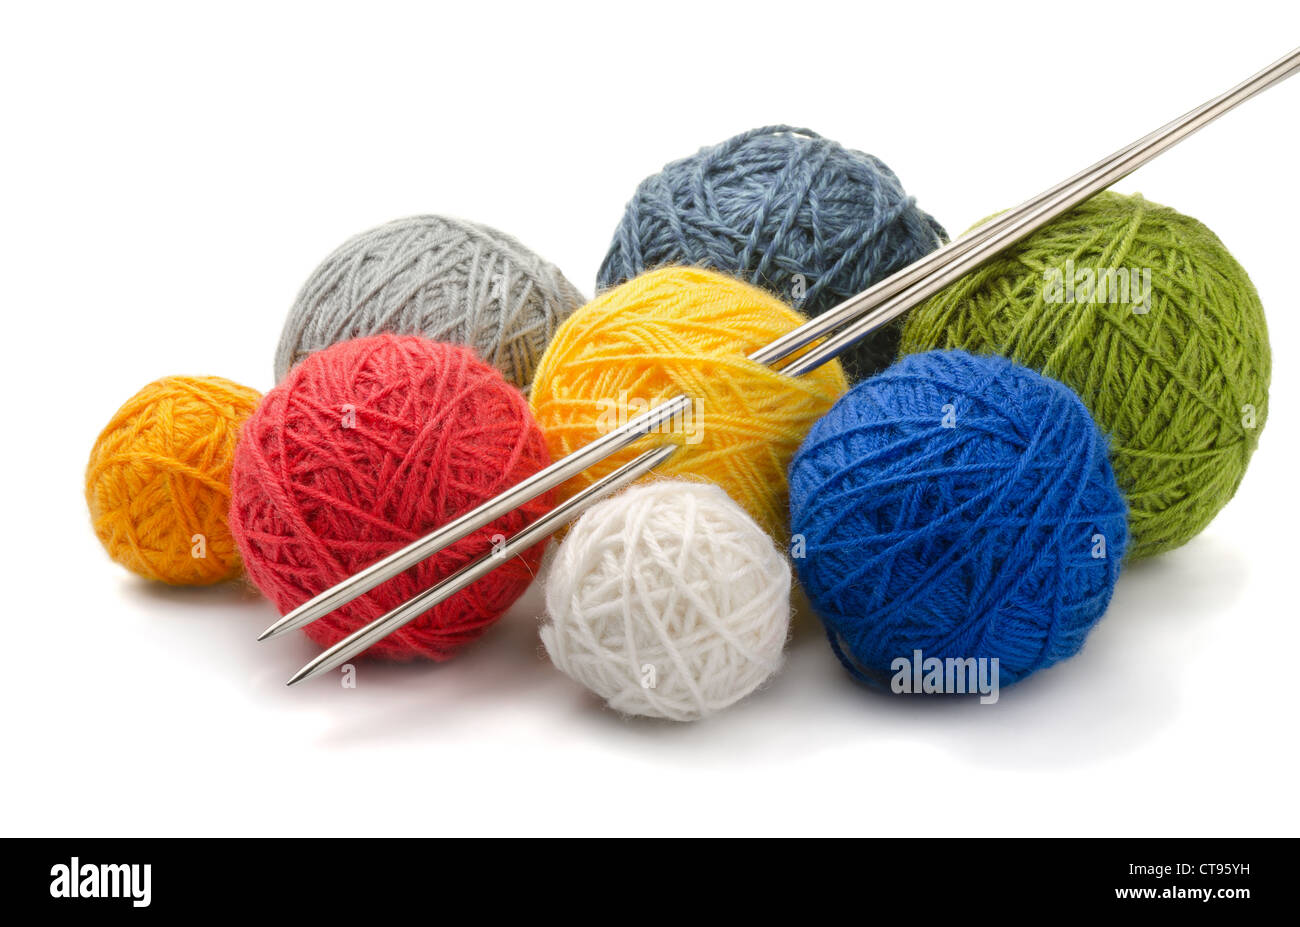 Color yarn balls and knitting needles isolated on white Stock Photo